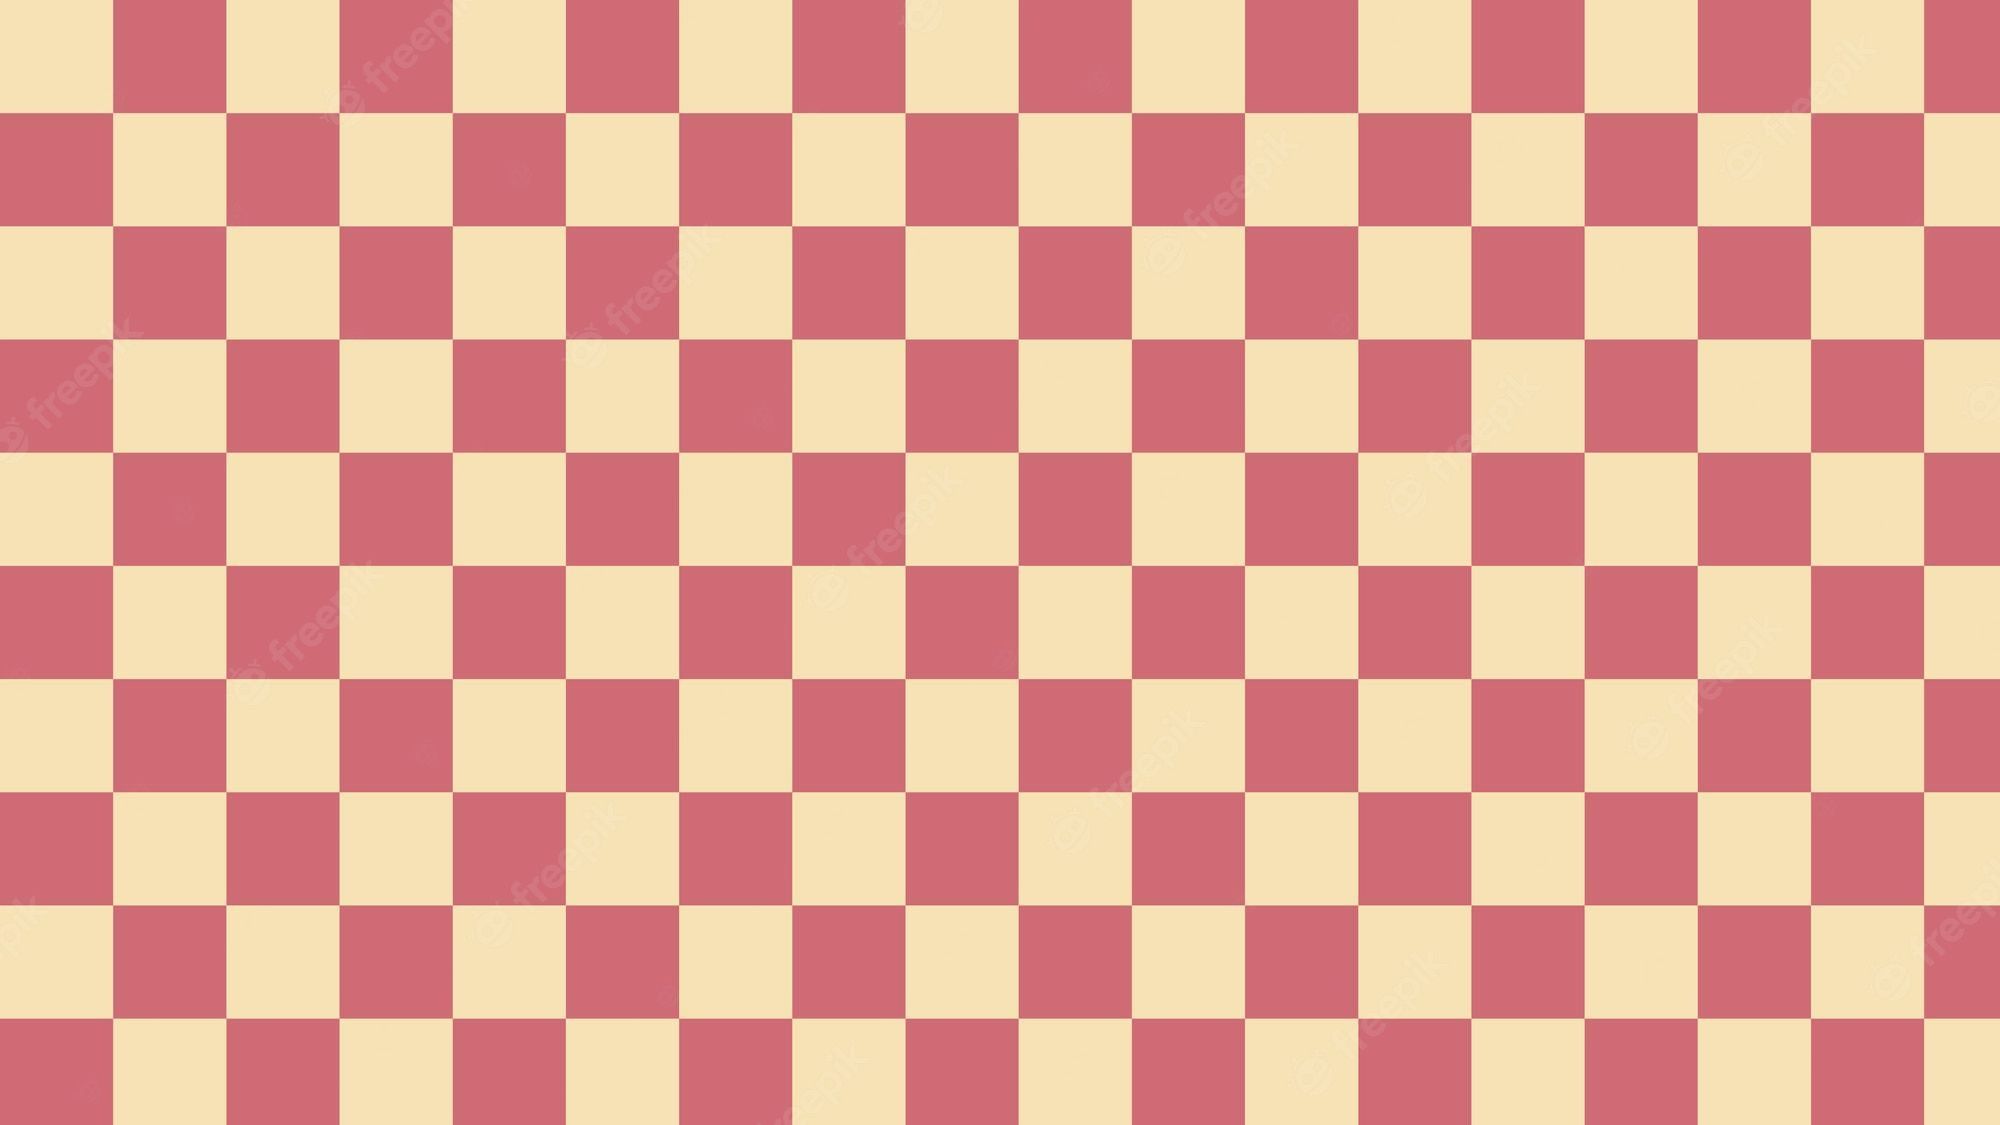 A red and white checkered pattern - Light yellow, light red